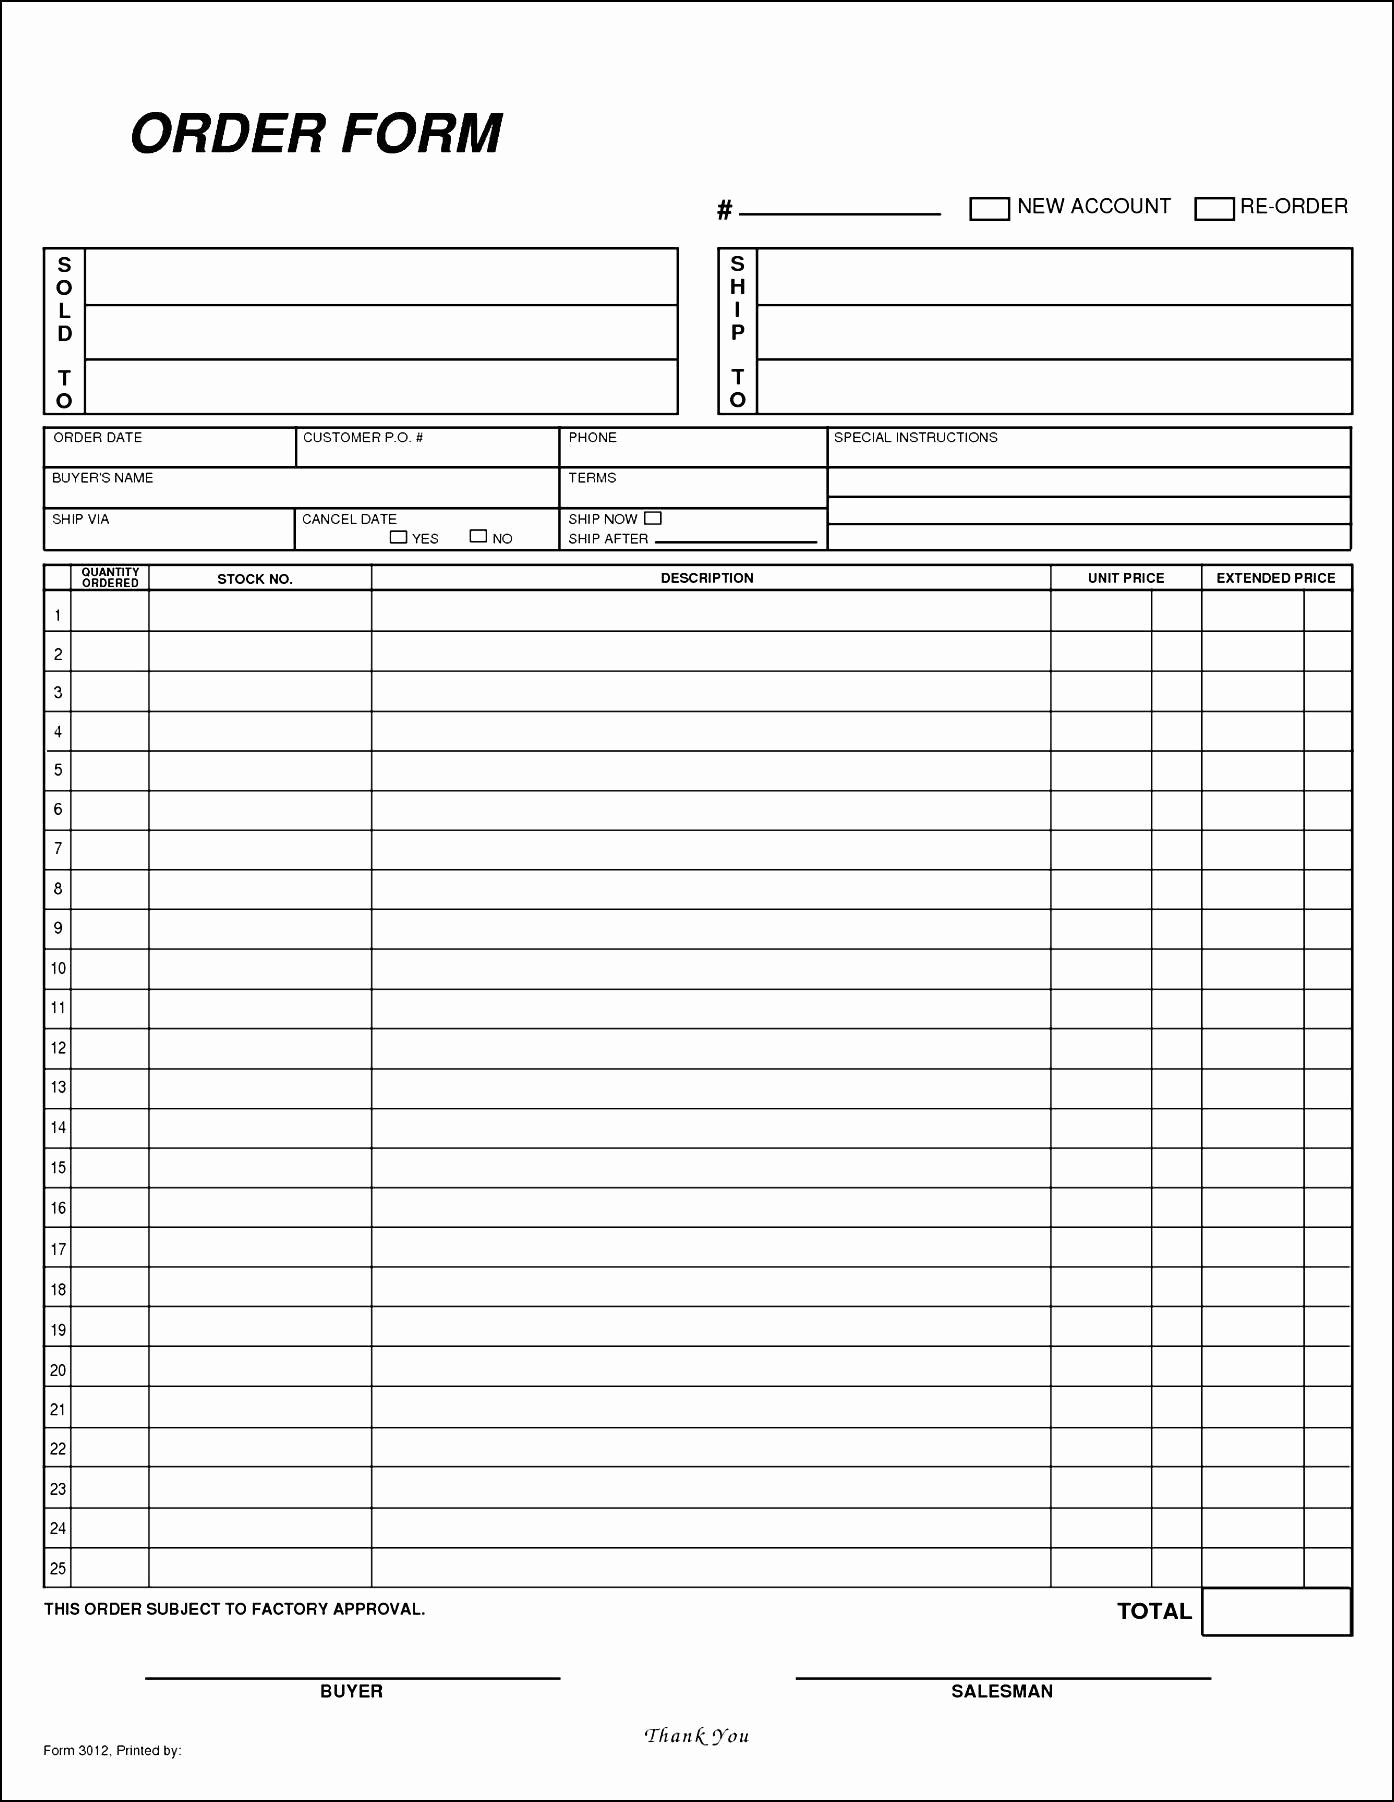 Sales order form Templates Luxury Free Blank order form Template Besttemplates123 Sample order Templates